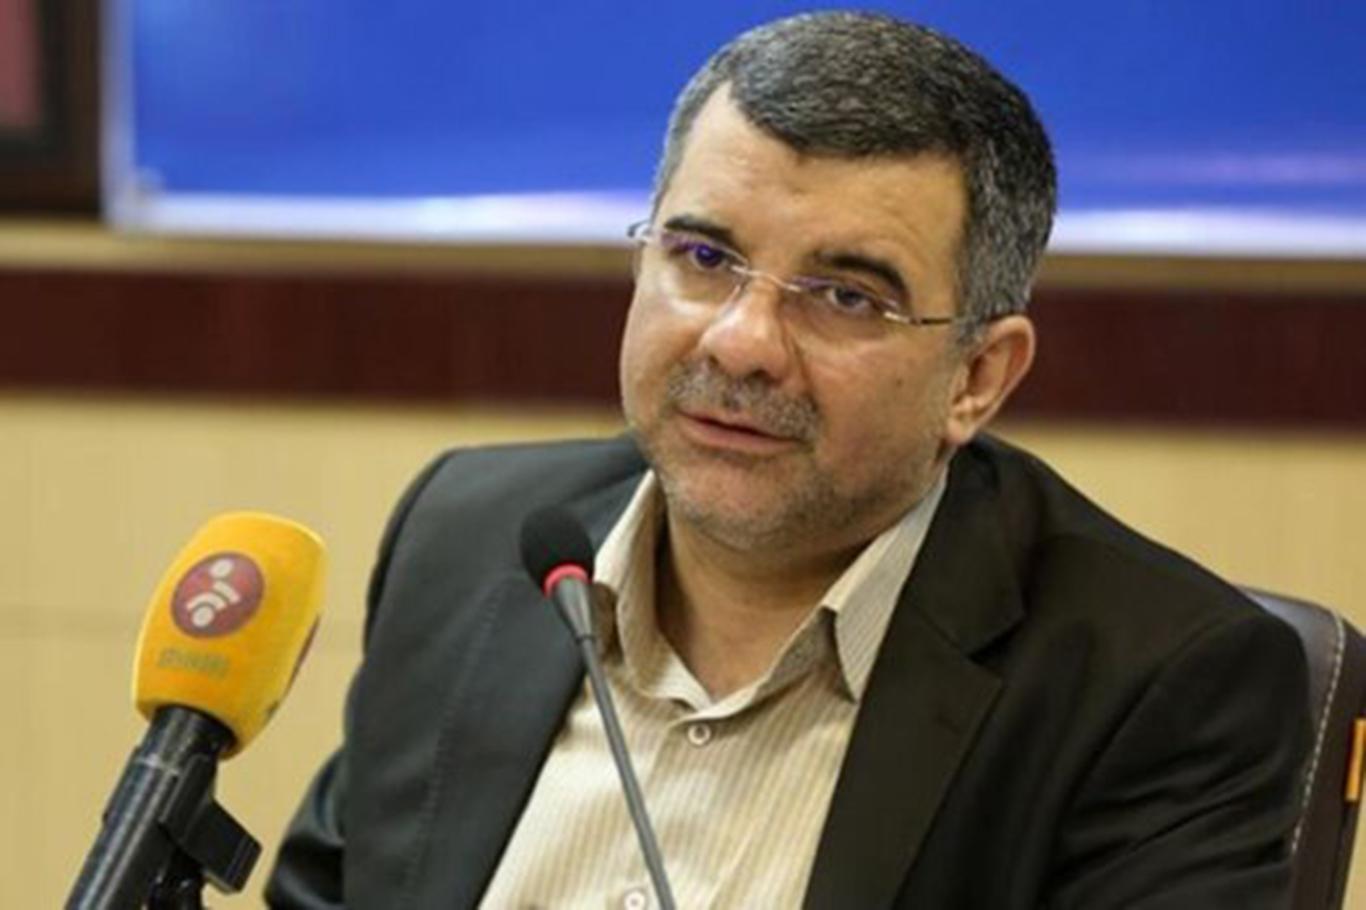 A smear campaign mounted against our country on coronavirus, Iran says